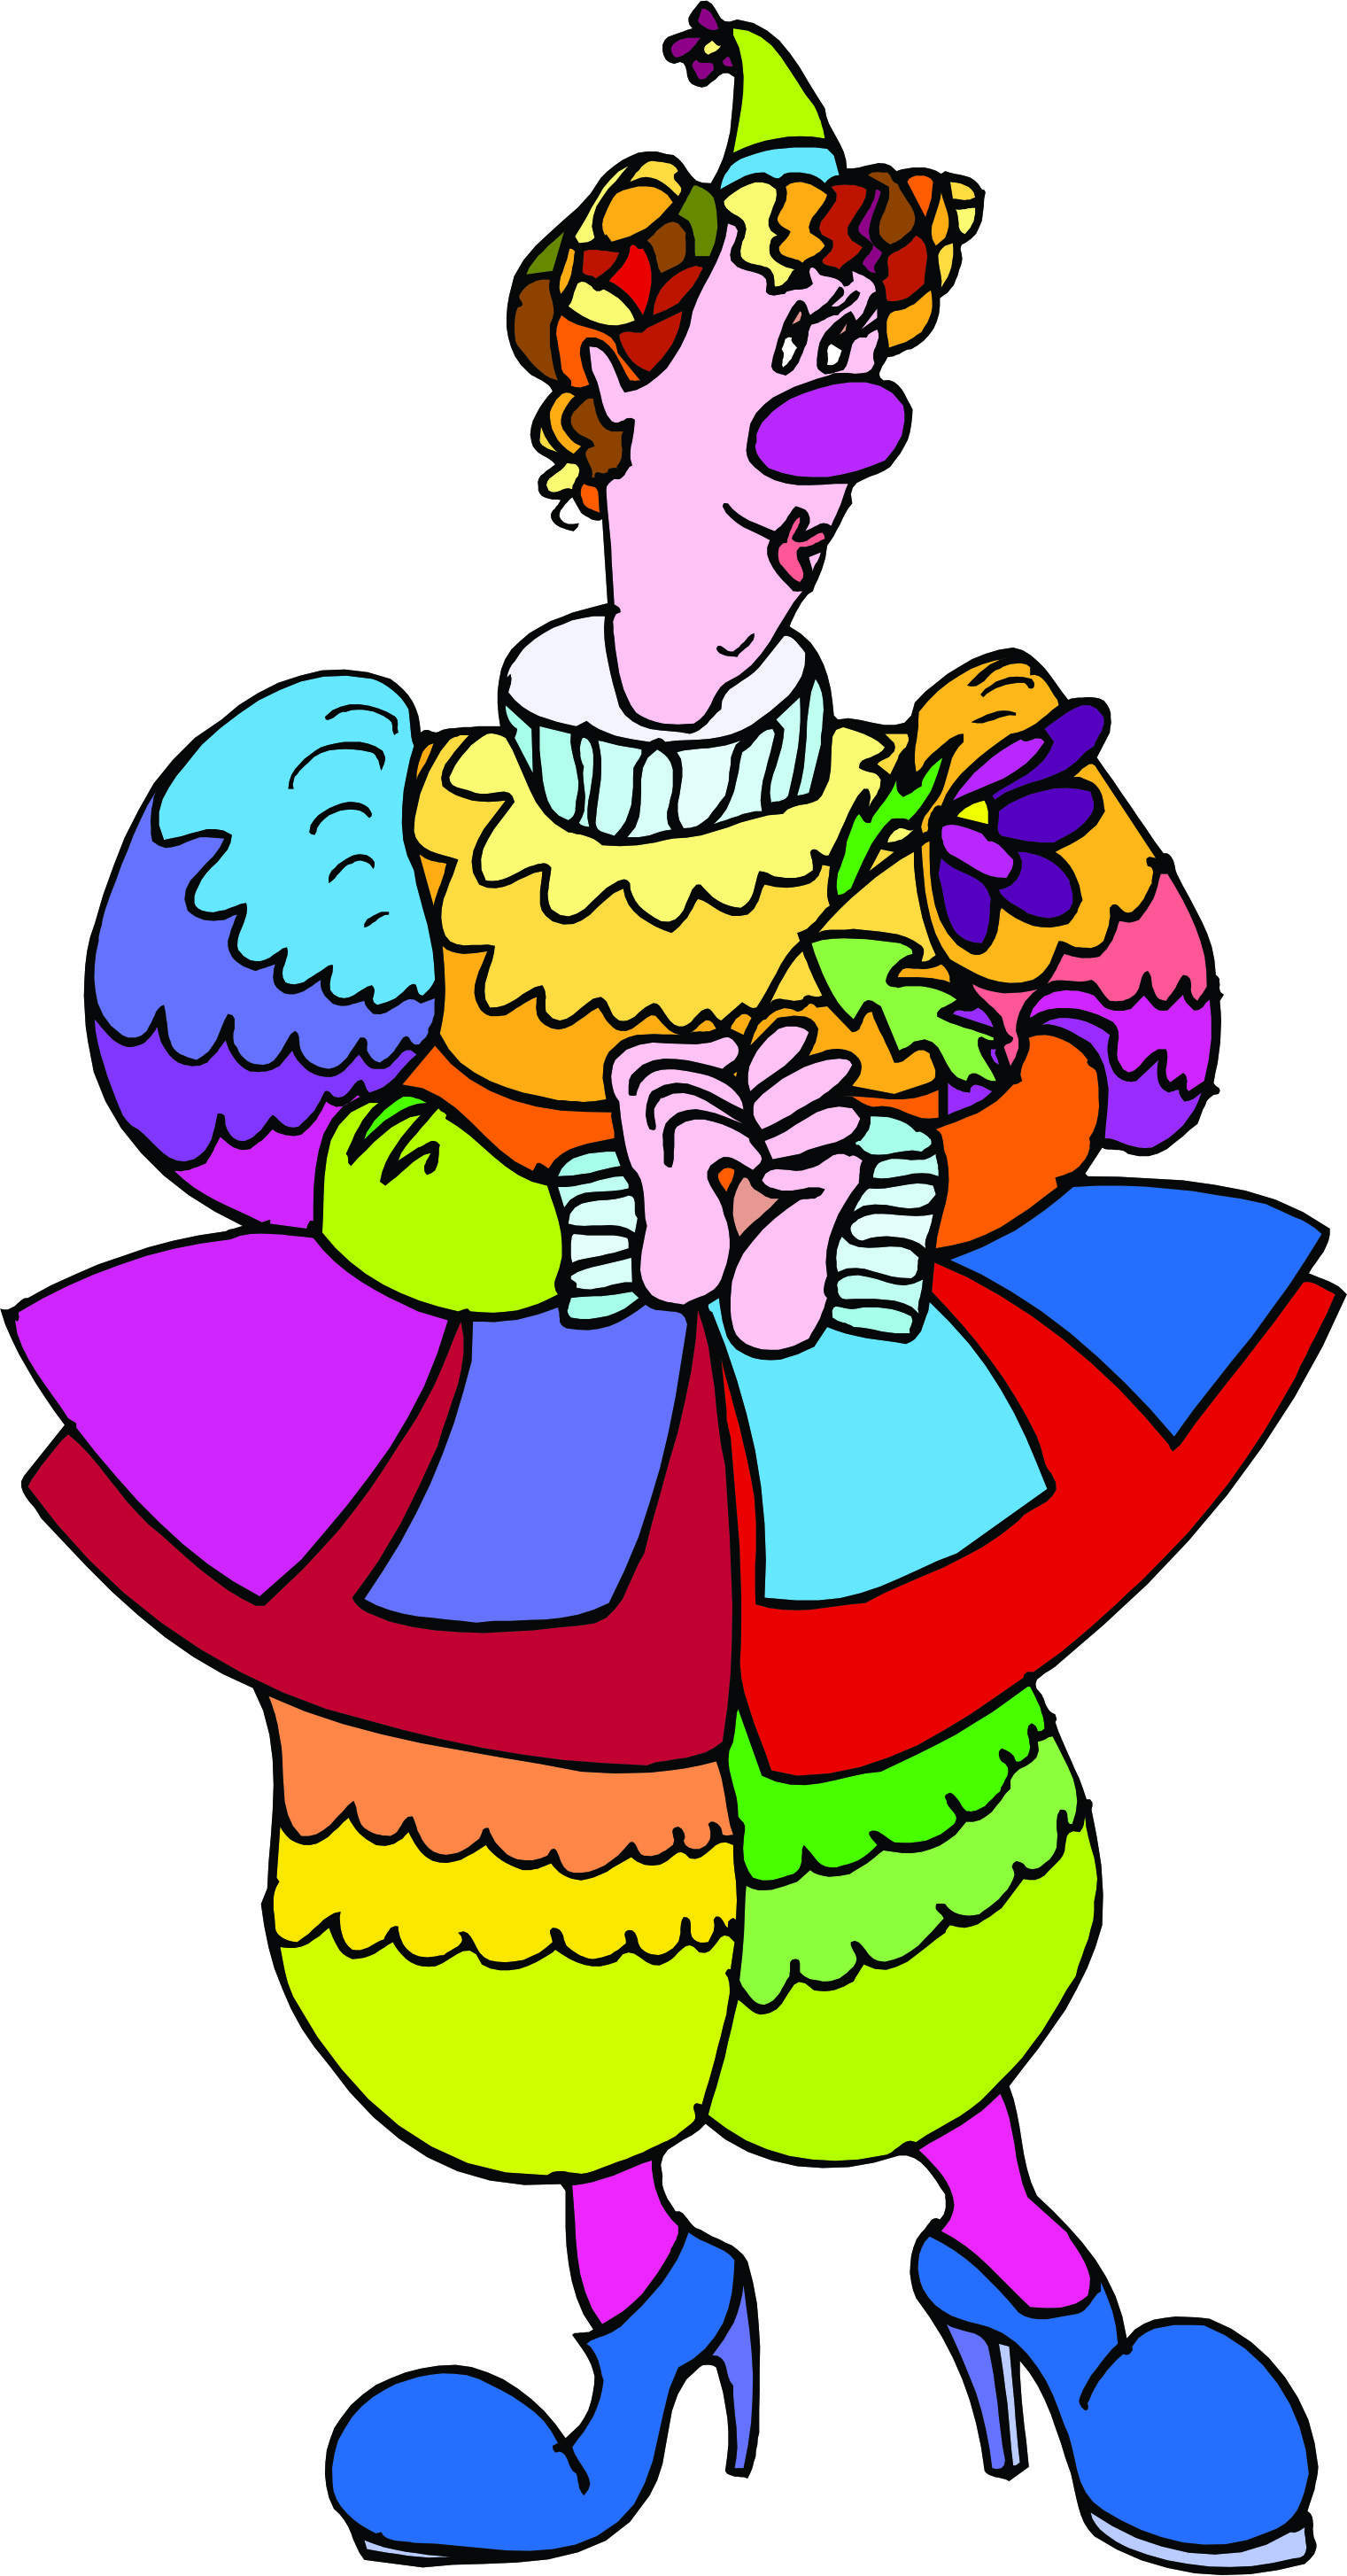 Cartoon Clowns | Page 4 - Clipart library - Clipart library